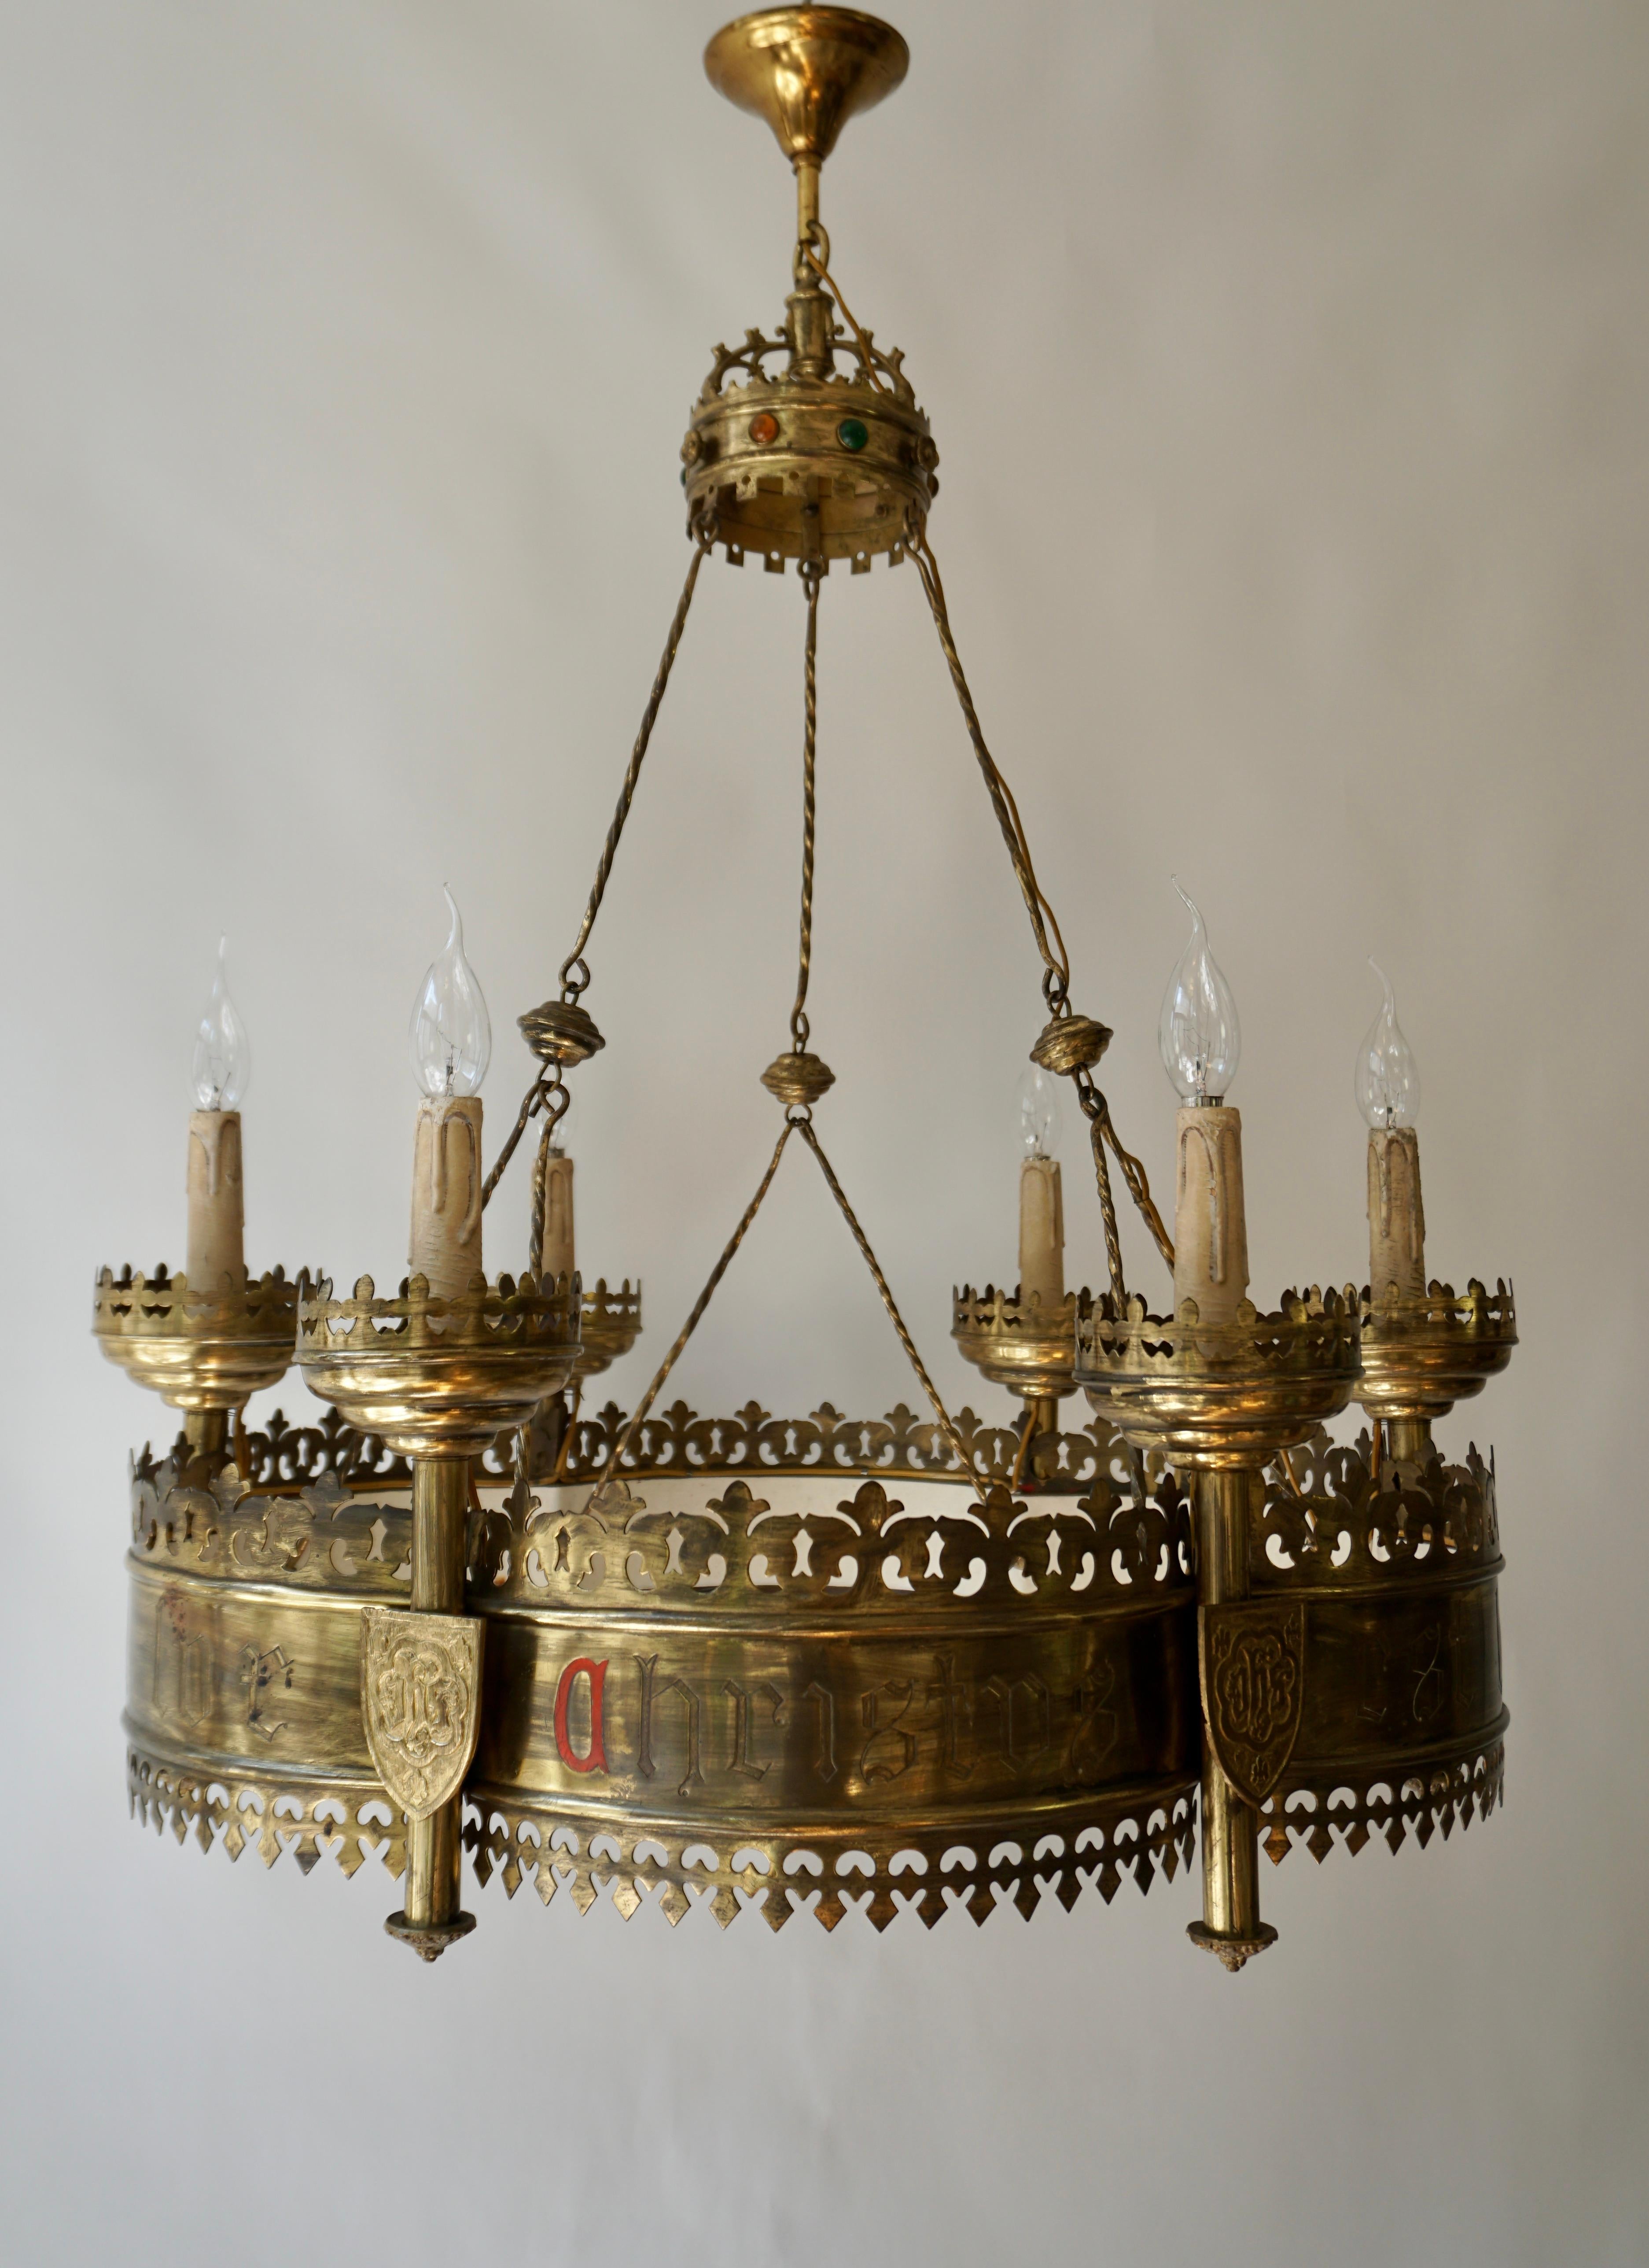 19th Century Large and Striking Bronze & Brass Gothic Revival Advent Wreath Chandelier For Sale